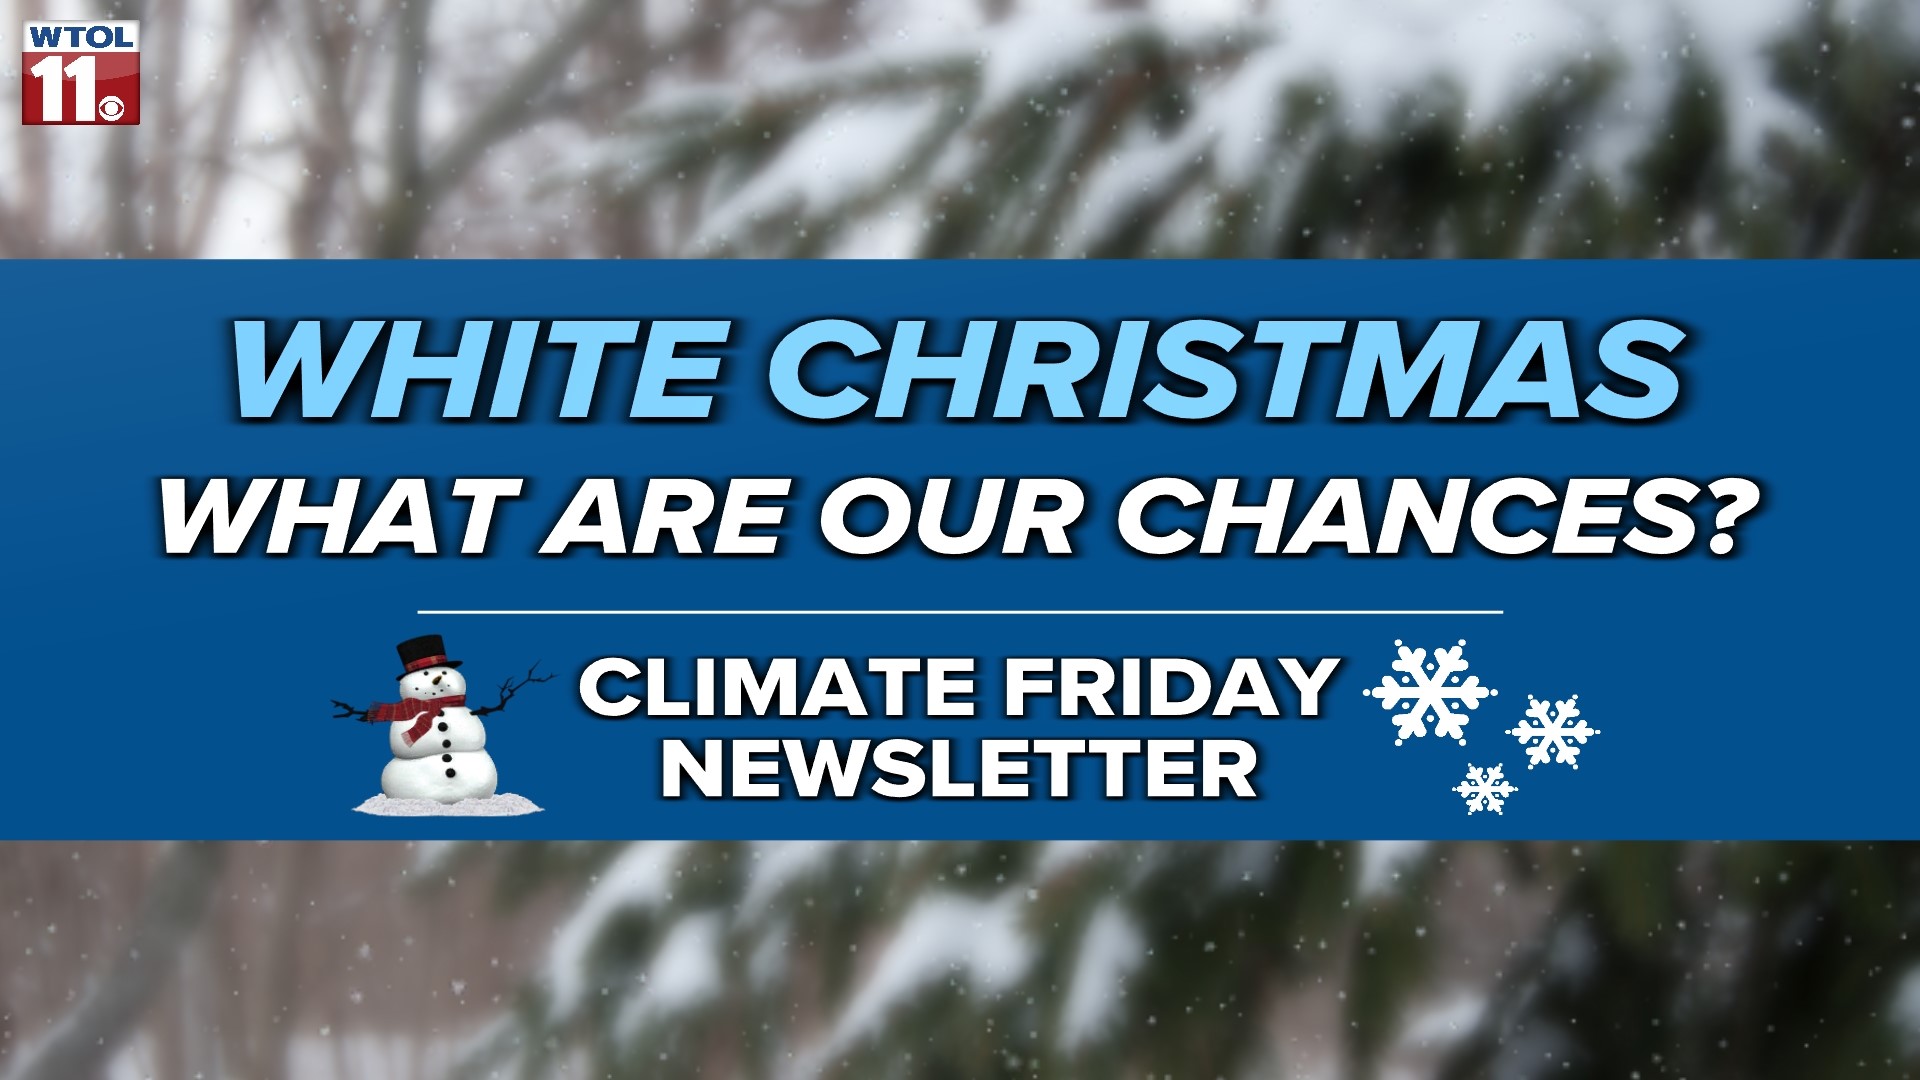 The WTOL 11 Weather Team is forecasting a green Christmas - but data indicate that isn't uncommon for northwest Ohio.